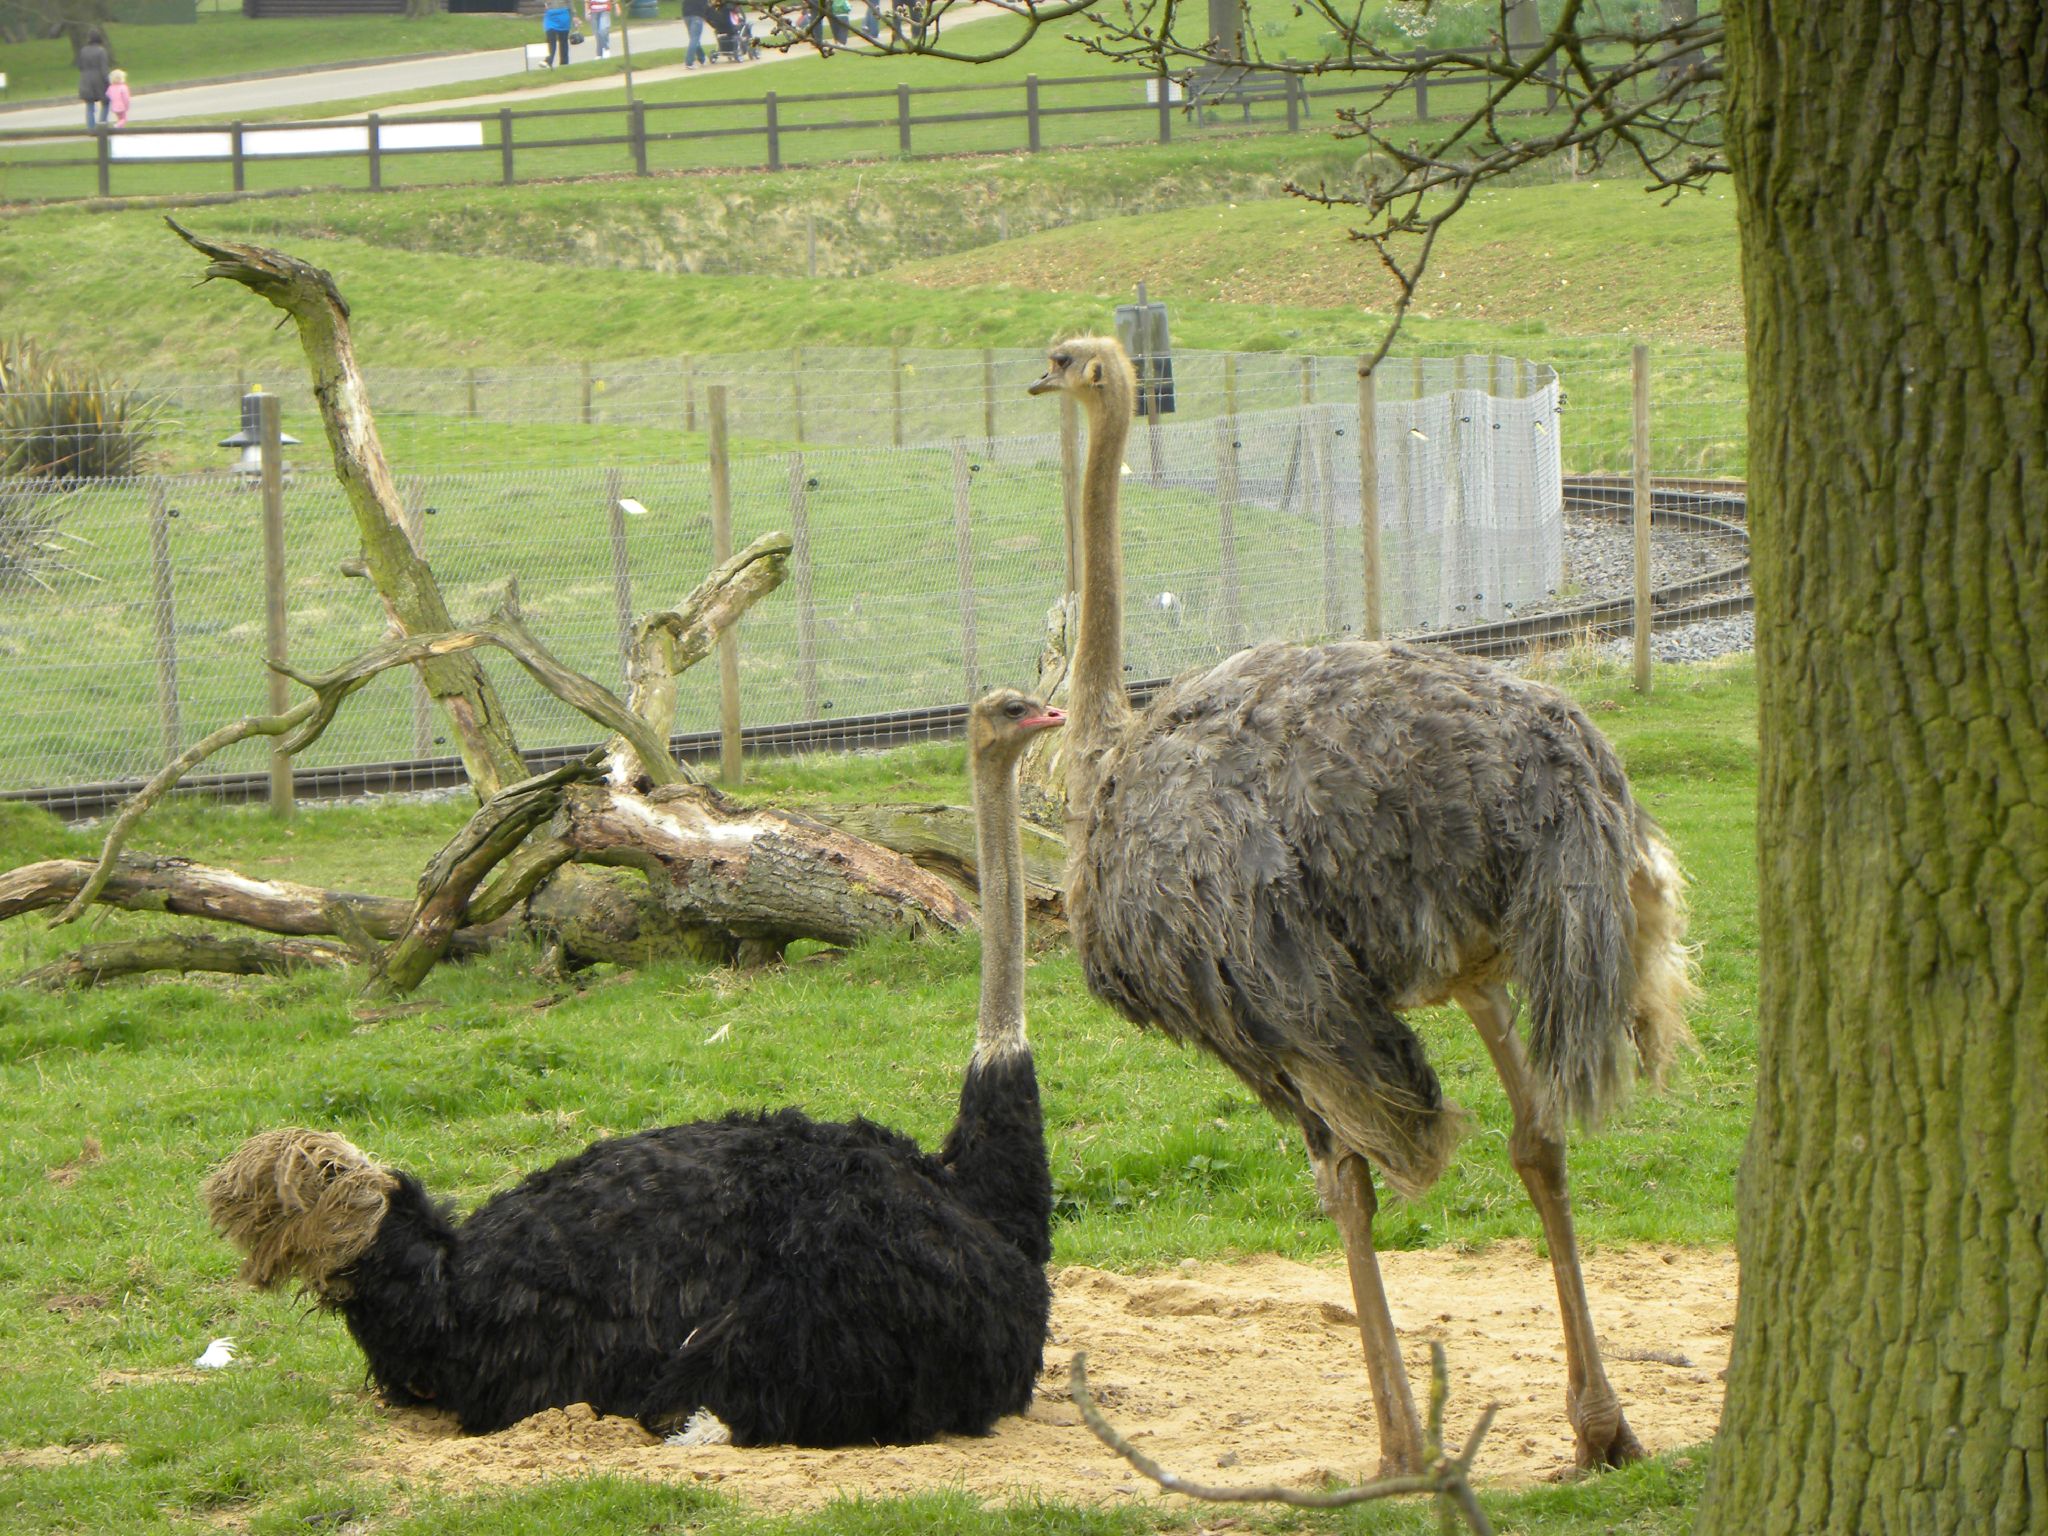 ostriches on the ground in a zoo enclosure